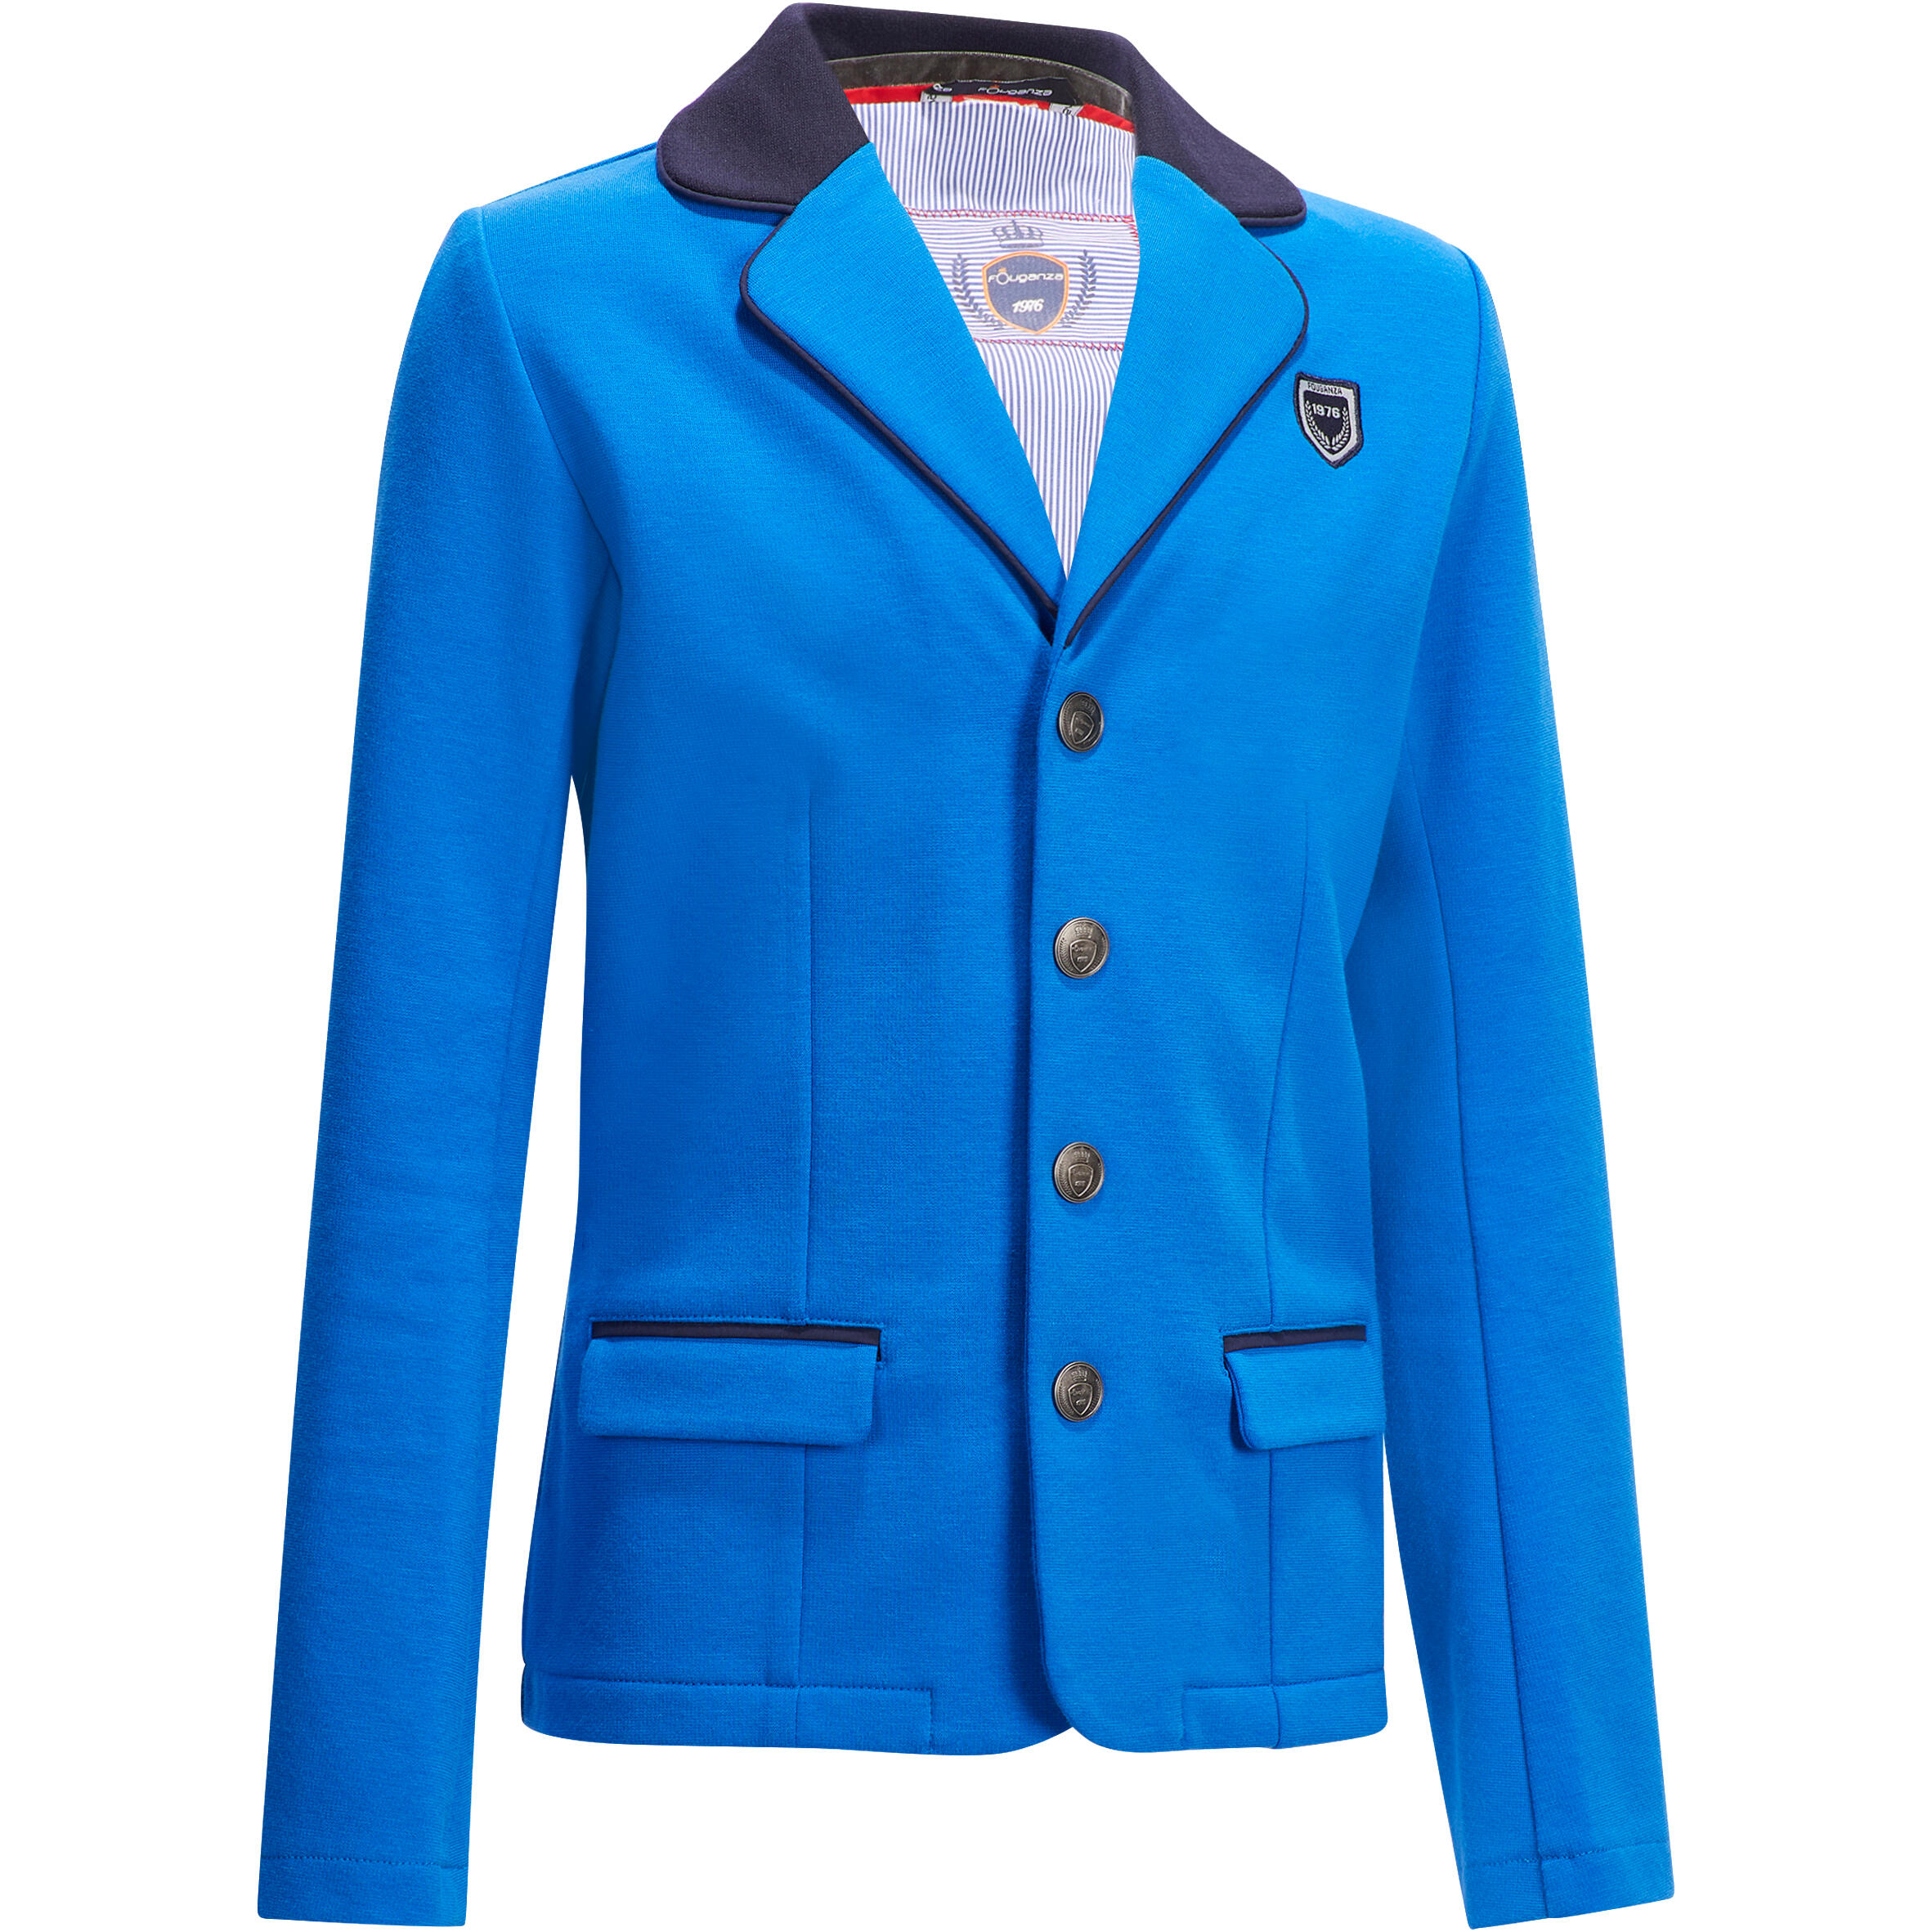 FOUGANZA Comp 100 Kids' Horse Riding Competition Jacket - Royal Blue